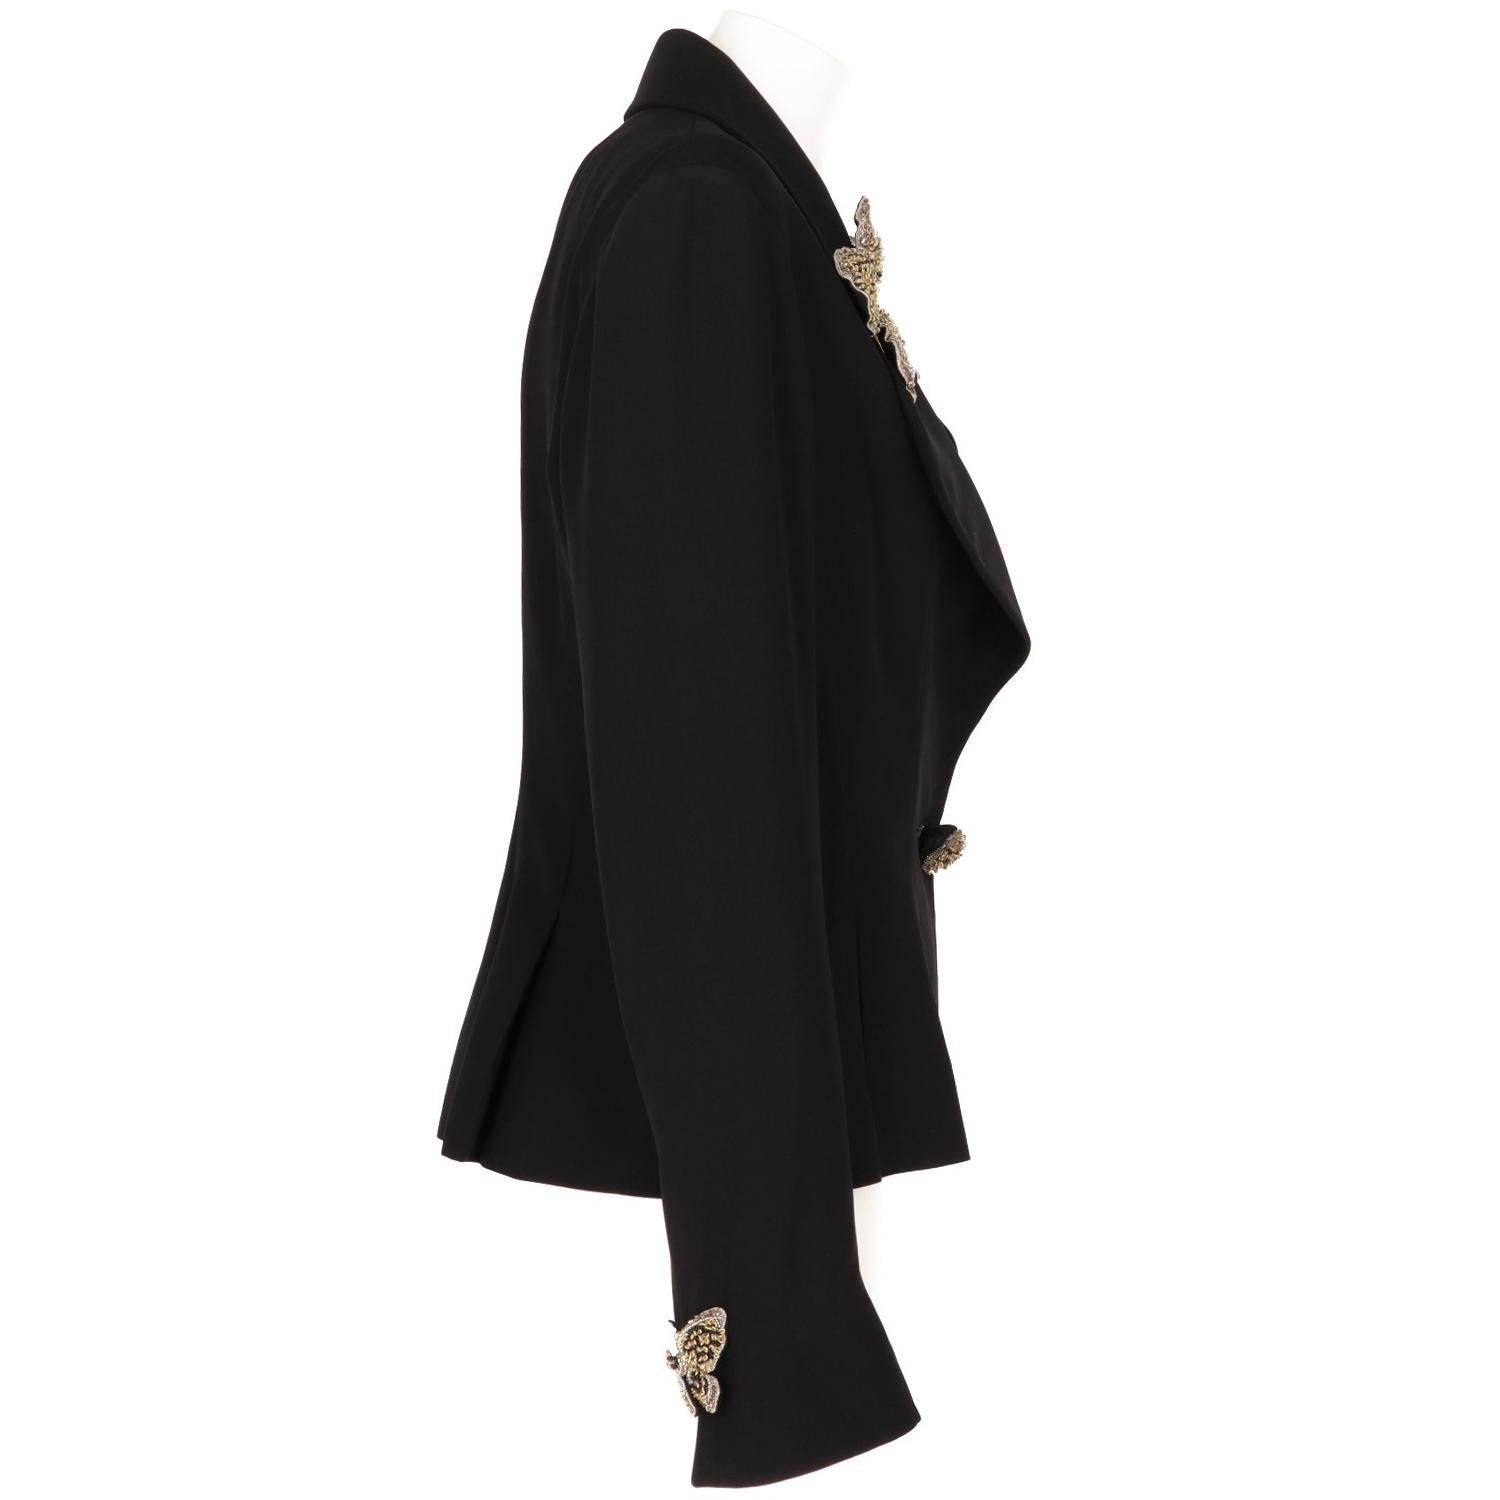 Elegant black blazer by Karl Lagrefeld with scallopped wide revers, front pinces and a pleated bottom. The jacket is embellished with gold and black butterflies jewels applications, made of sequins and beads, on the revers and on the cuffs in a